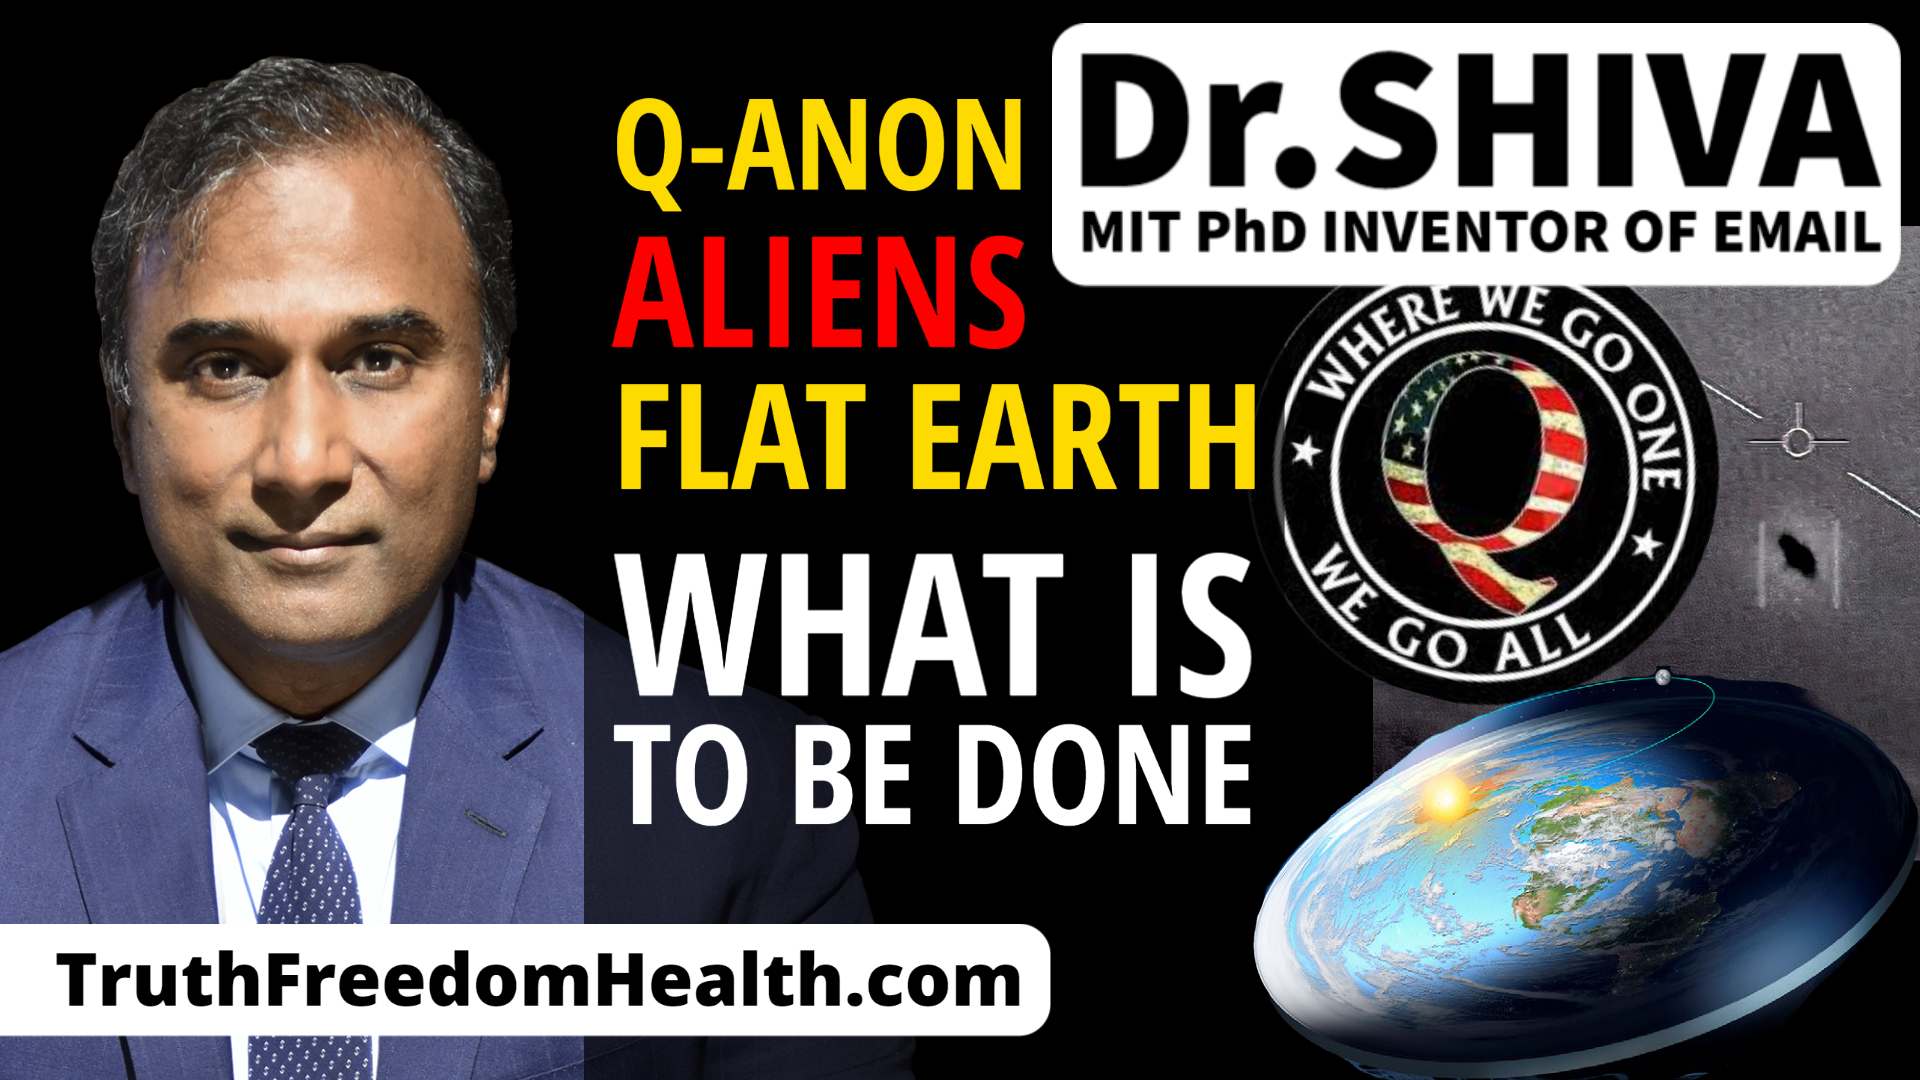 Dr.SHIVA LIVE: Q-Anon, Alien Invasion & Flat Earth. What Is To Be Done.